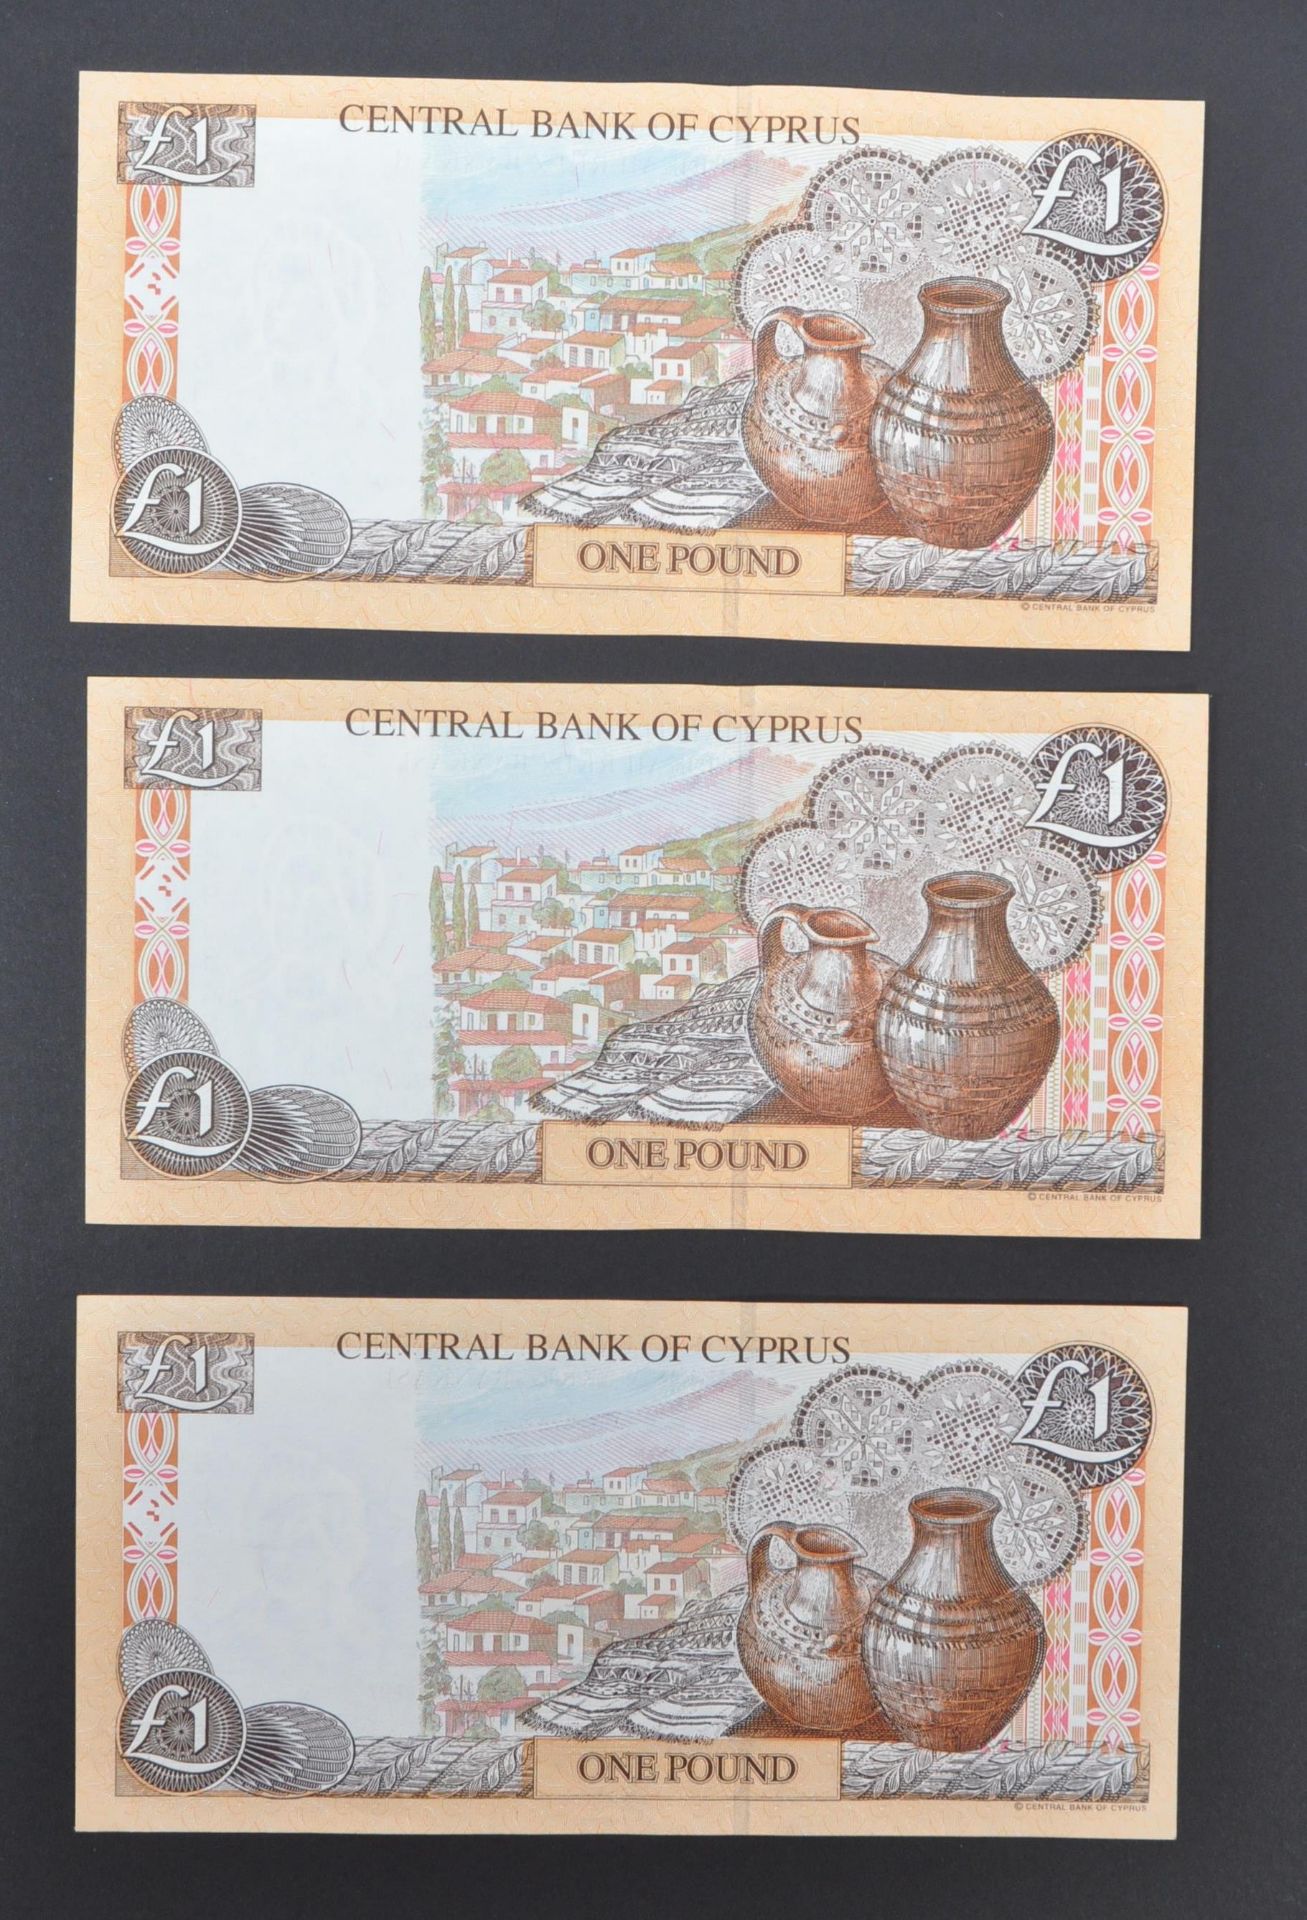 INTERNATIONAL MOSTLY UNCIRCULATED BANK NOTES - EUROPE - Image 14 of 30